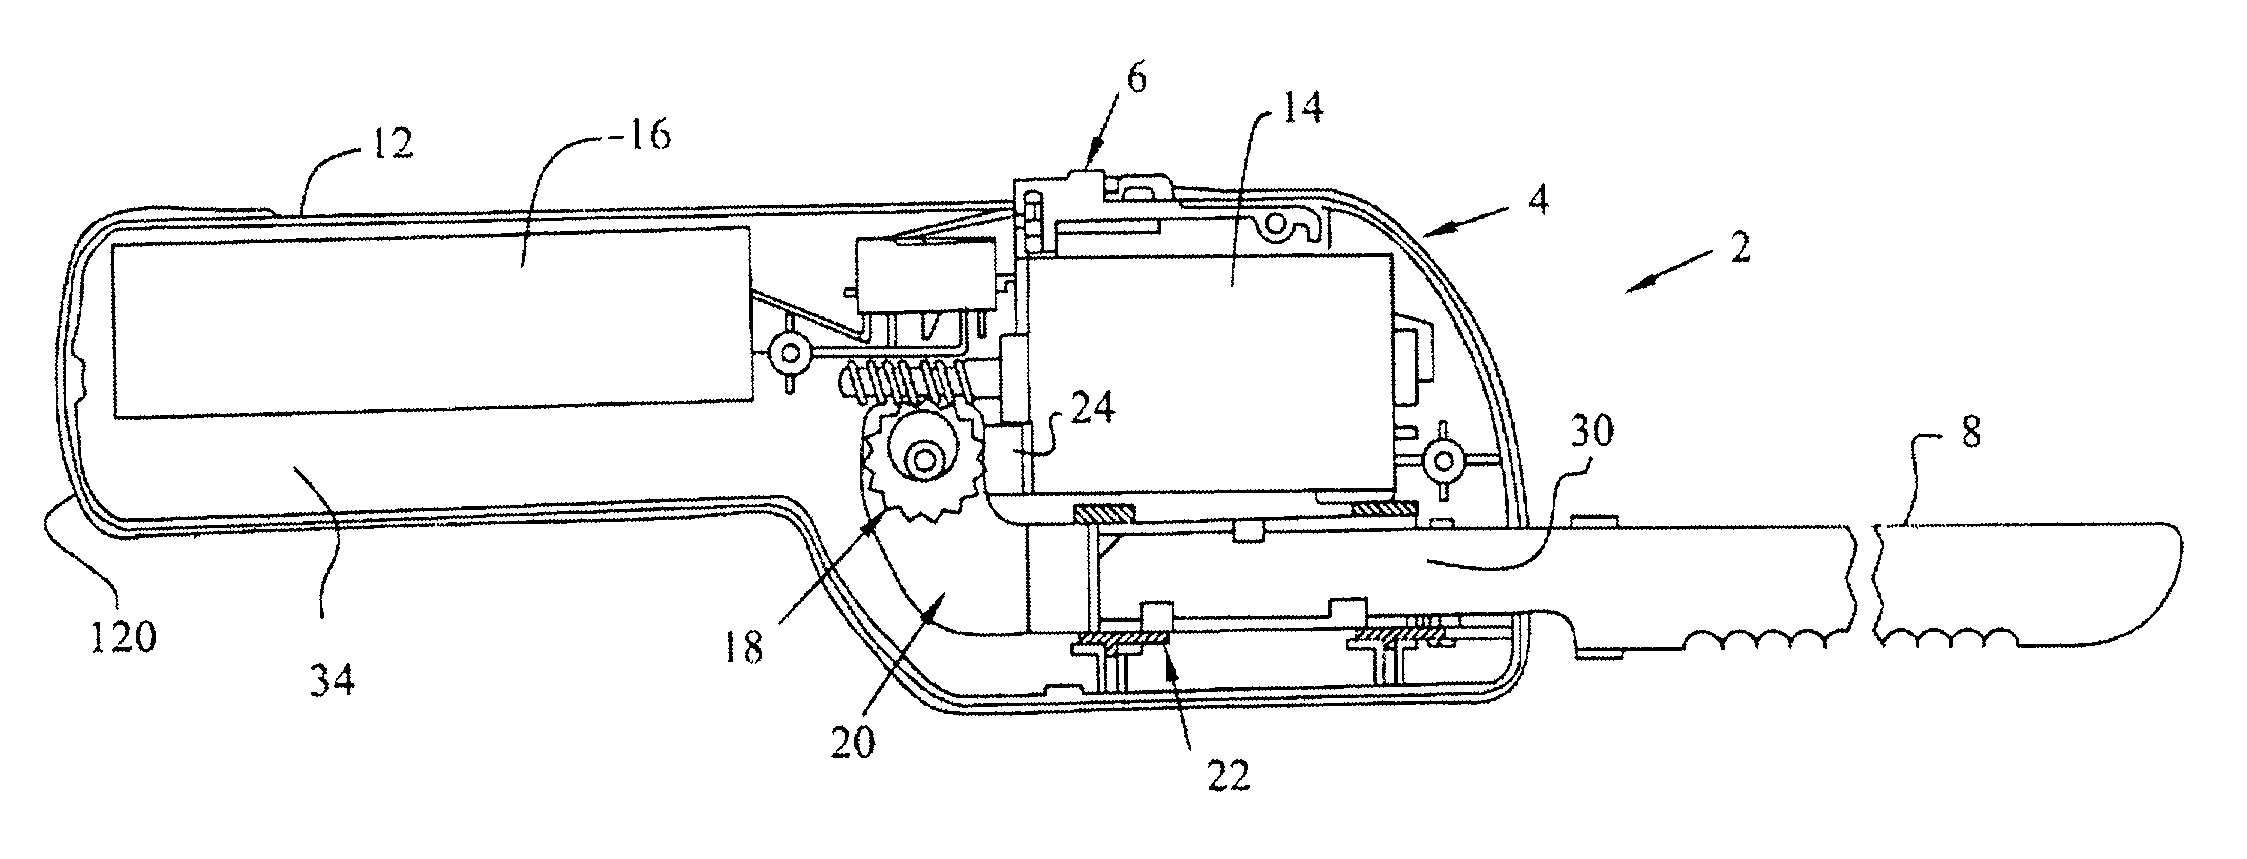 Battery-powered carving knife having a rechargeable battery pack